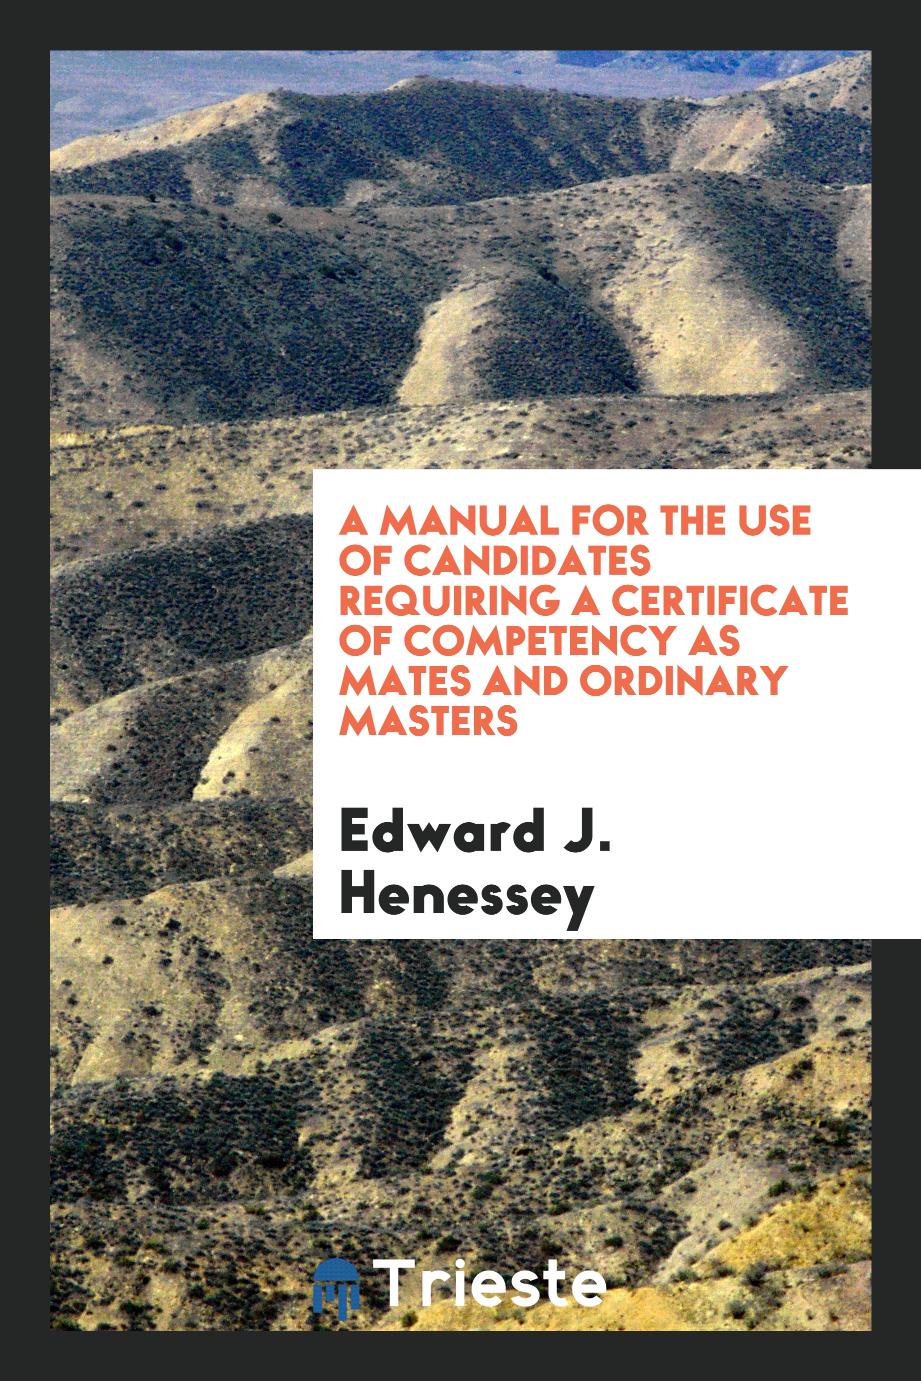 A manual for the use of candidates requiring a certificate of competency as mates and ordinary masters